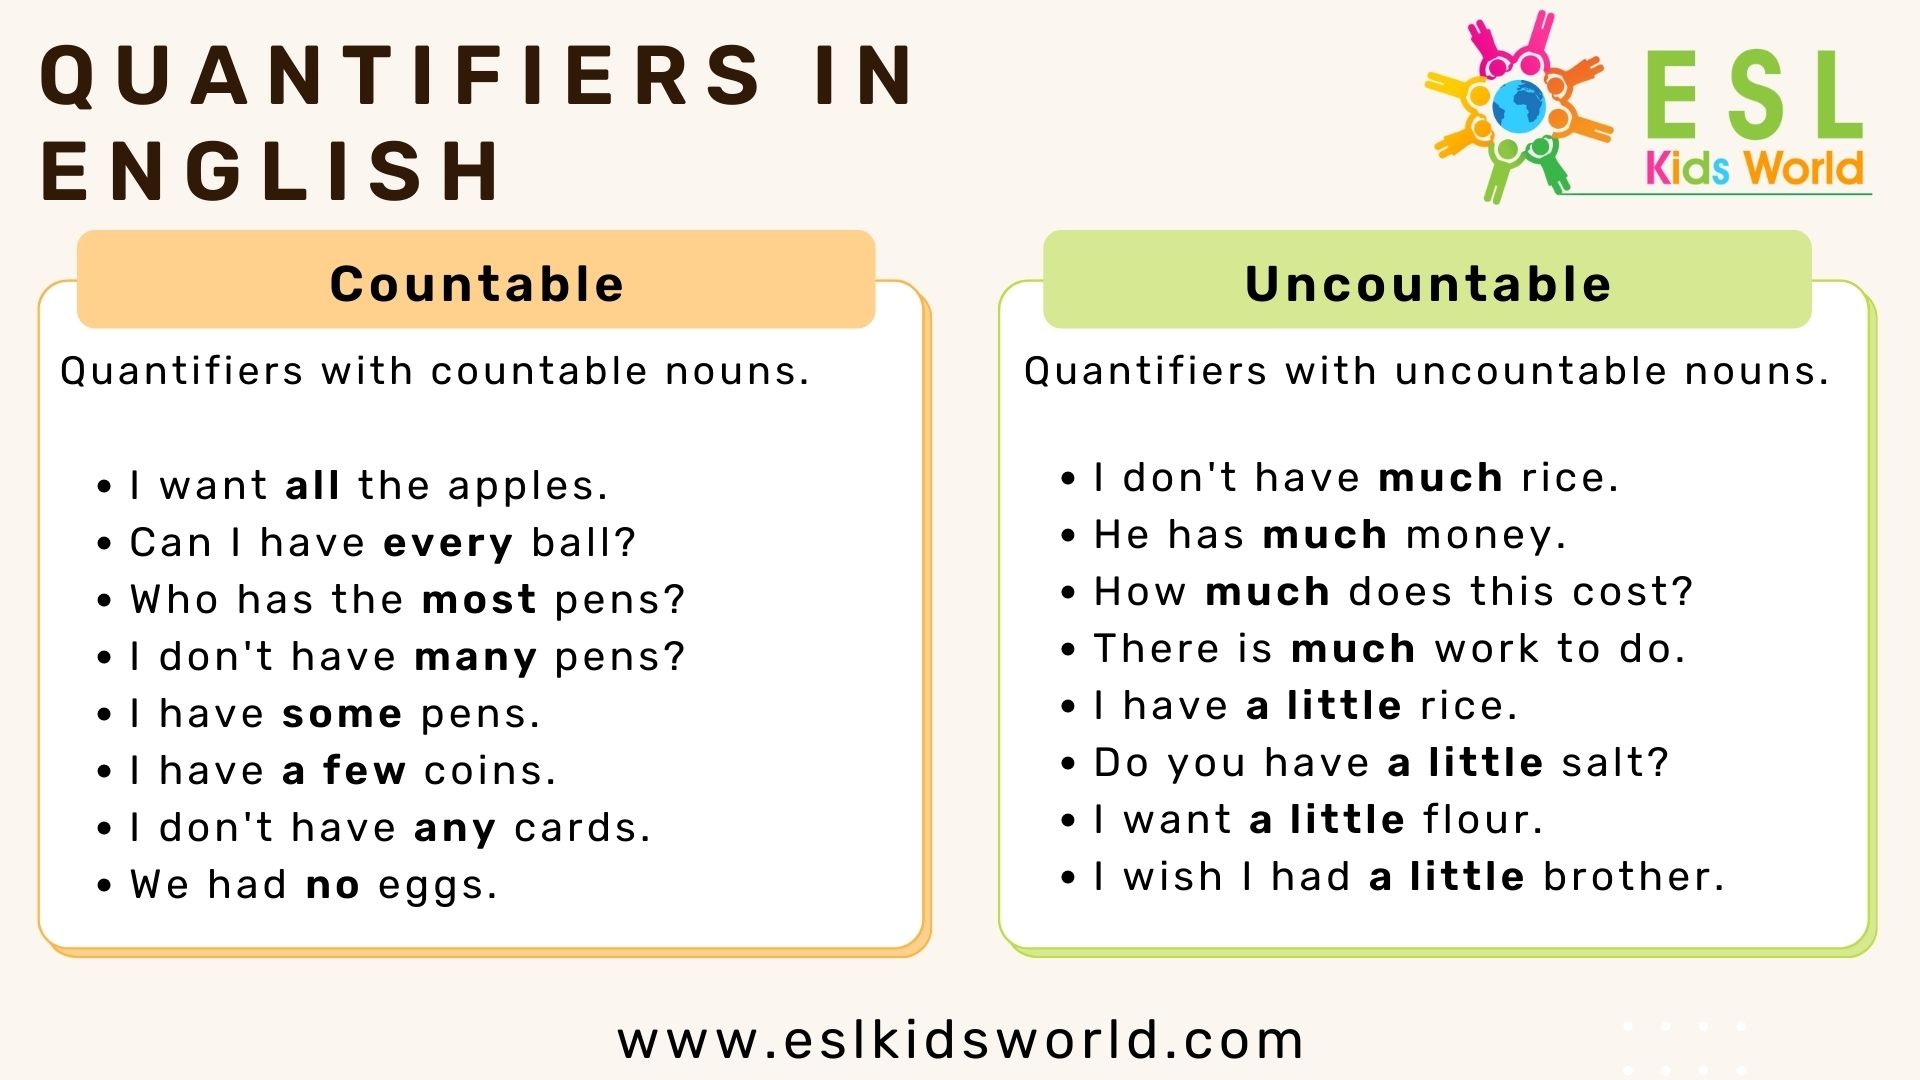 List Of Quantifiers For Uncountable Nouns